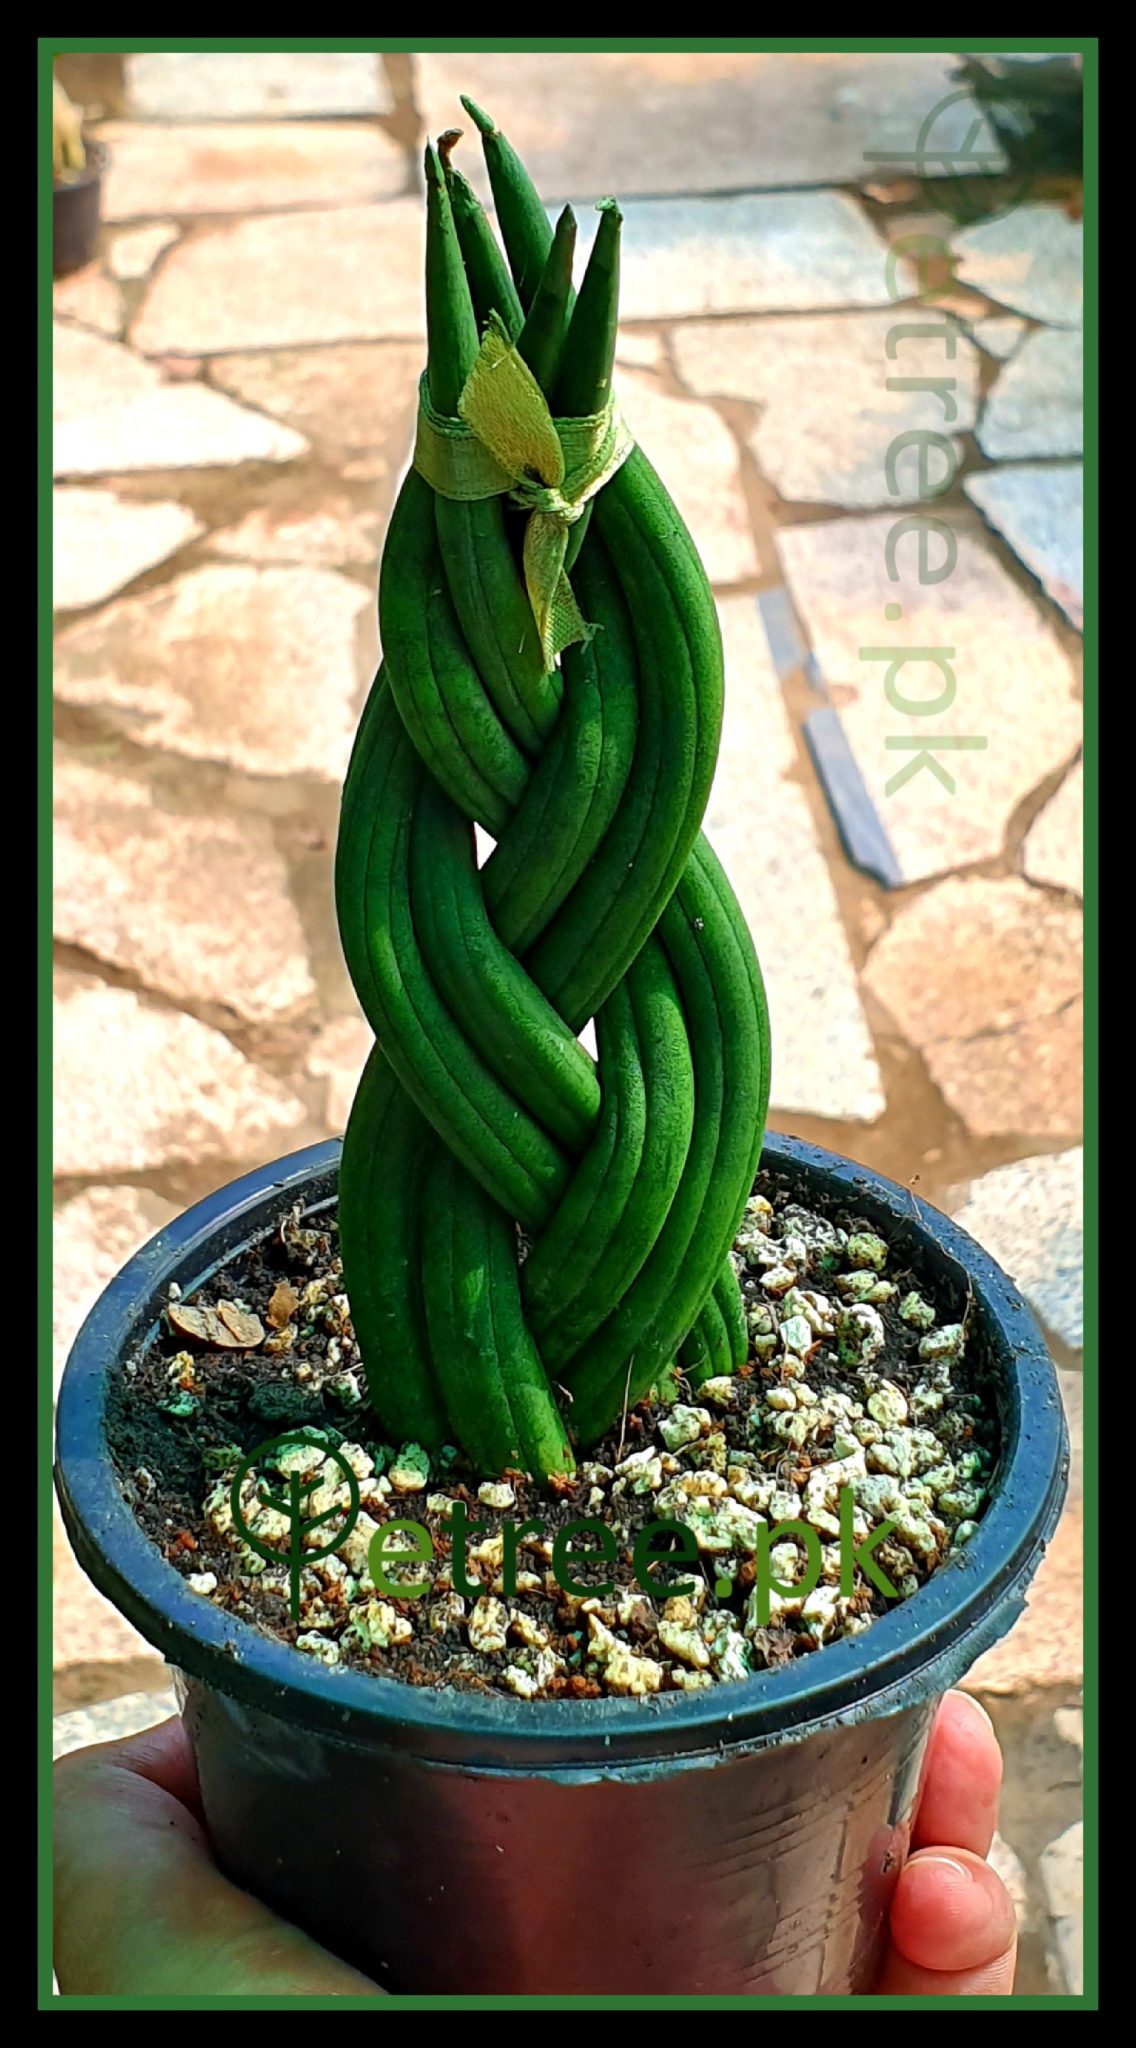 Sansevieria Cylindrica Braided African Spear Plant Medium Size Etree Pk,How To Grow Sweet Potatoes In A Bucket